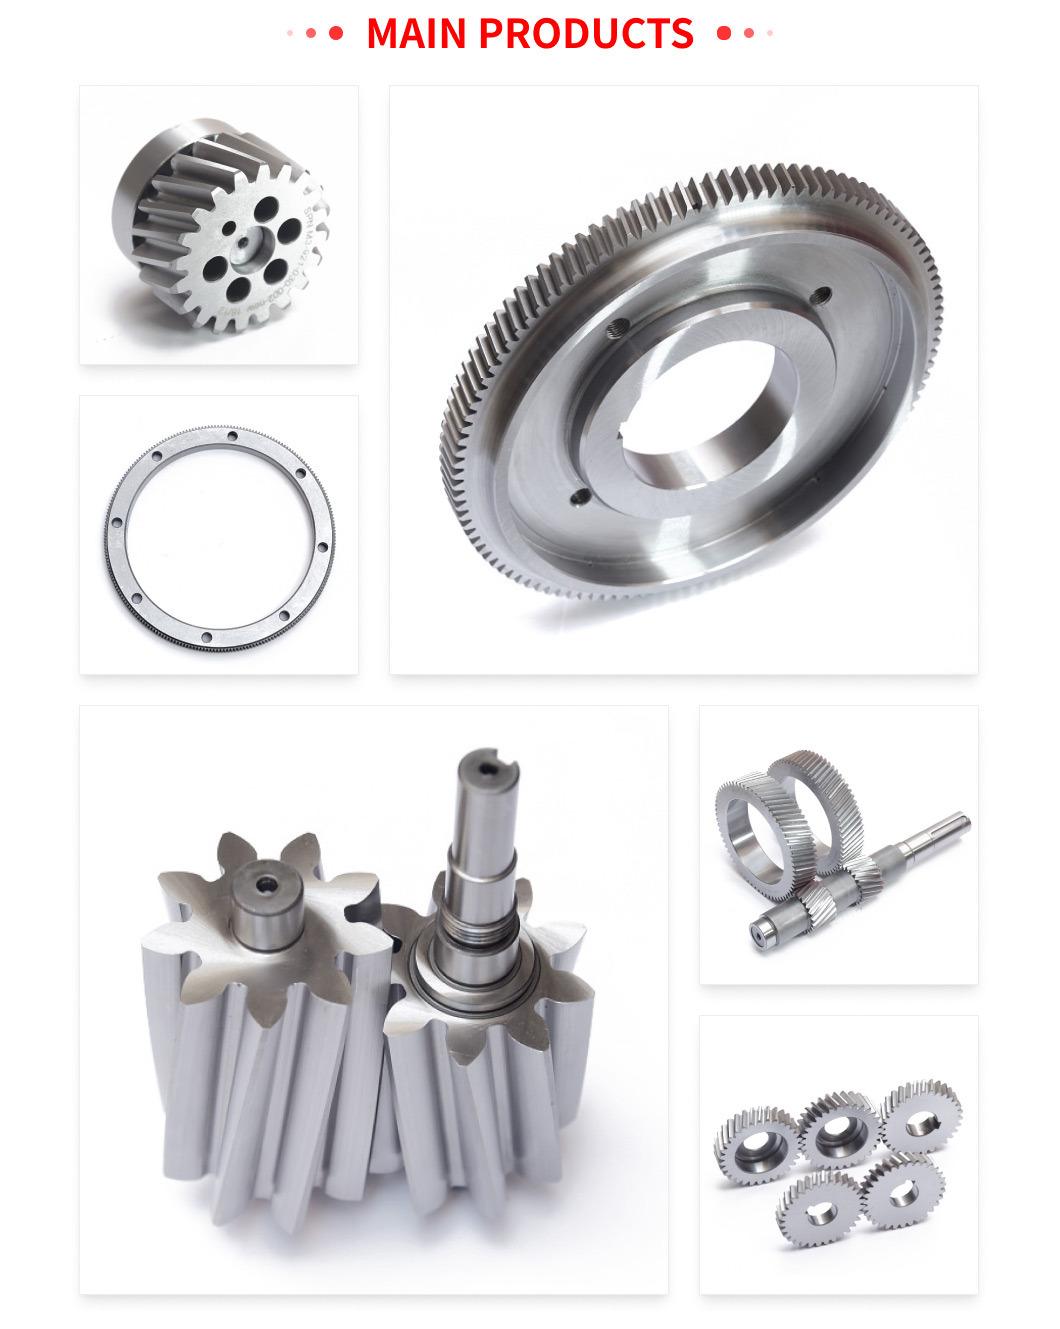 Factory Non-Standard Custom High Precision Grinding Cast Steel Cutting Cylindrical Gear Using Precision Machine Tools and The Automotive Industry